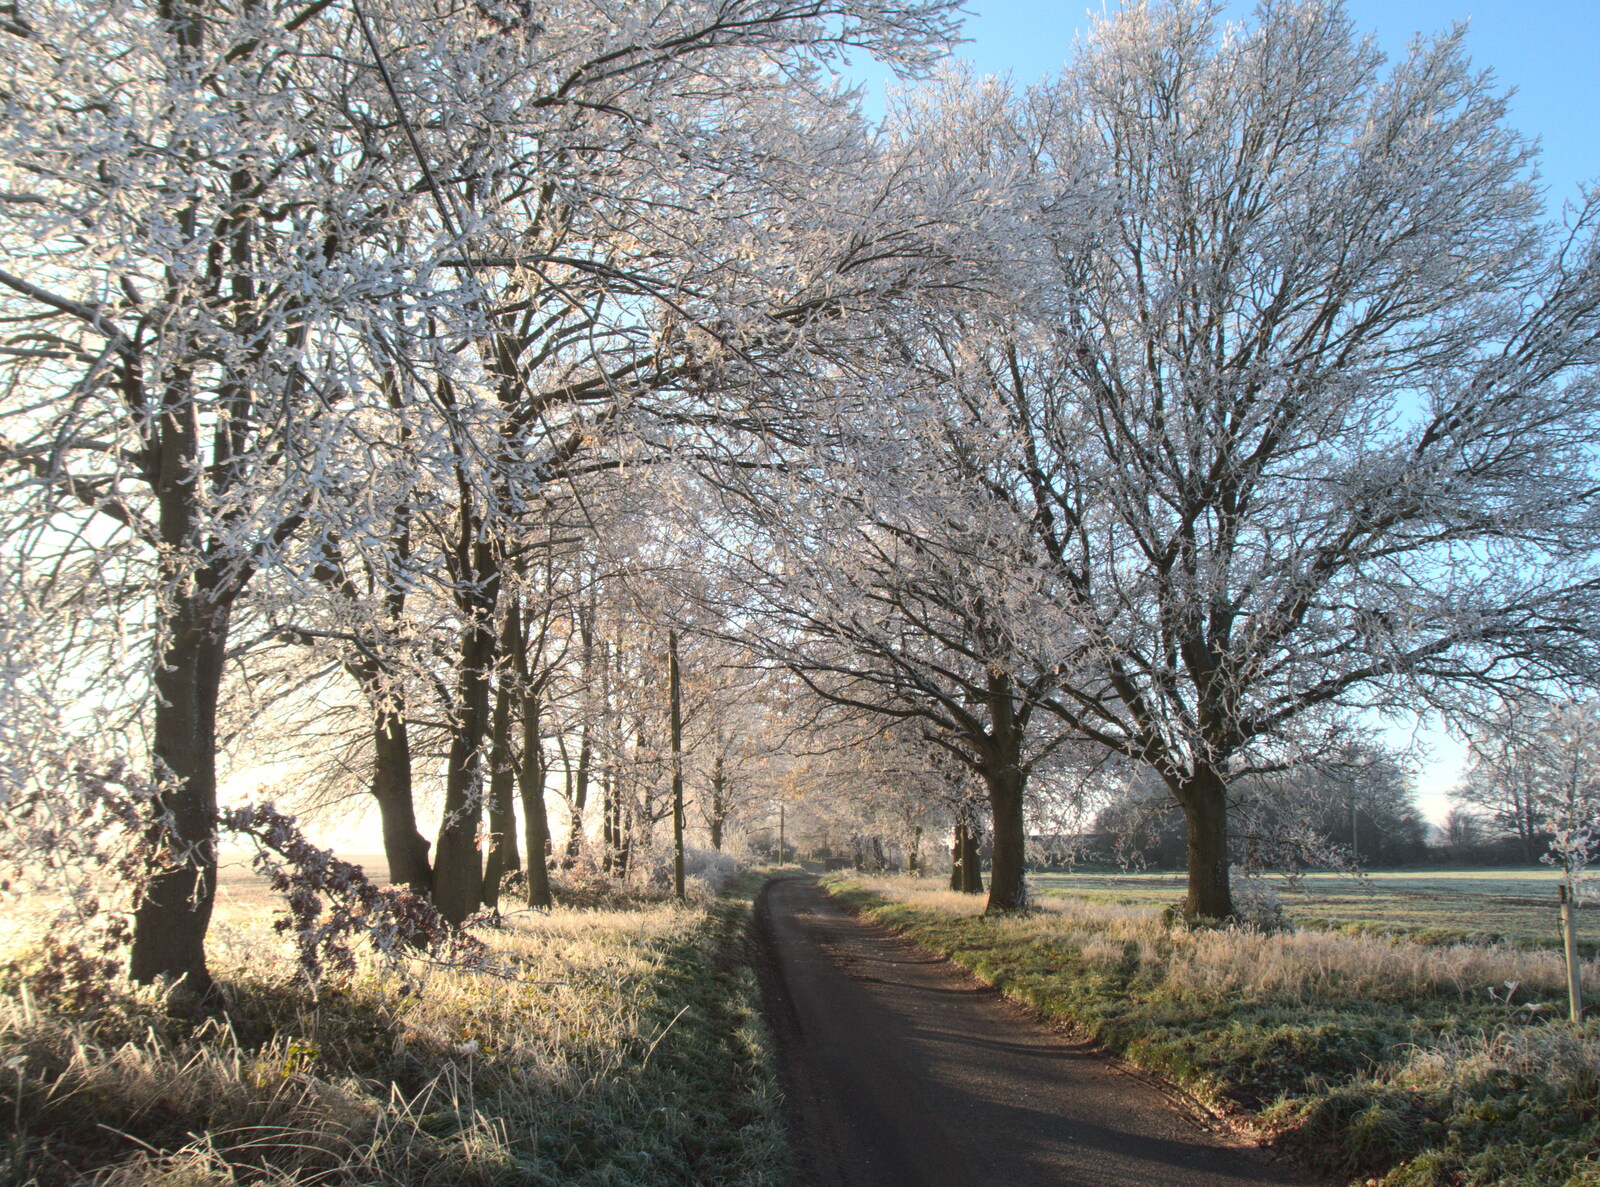 The road out of Thrandeston from More Frosty Rides and the Old Mink Sheds, Brome, Suffolk - 10th December 2020